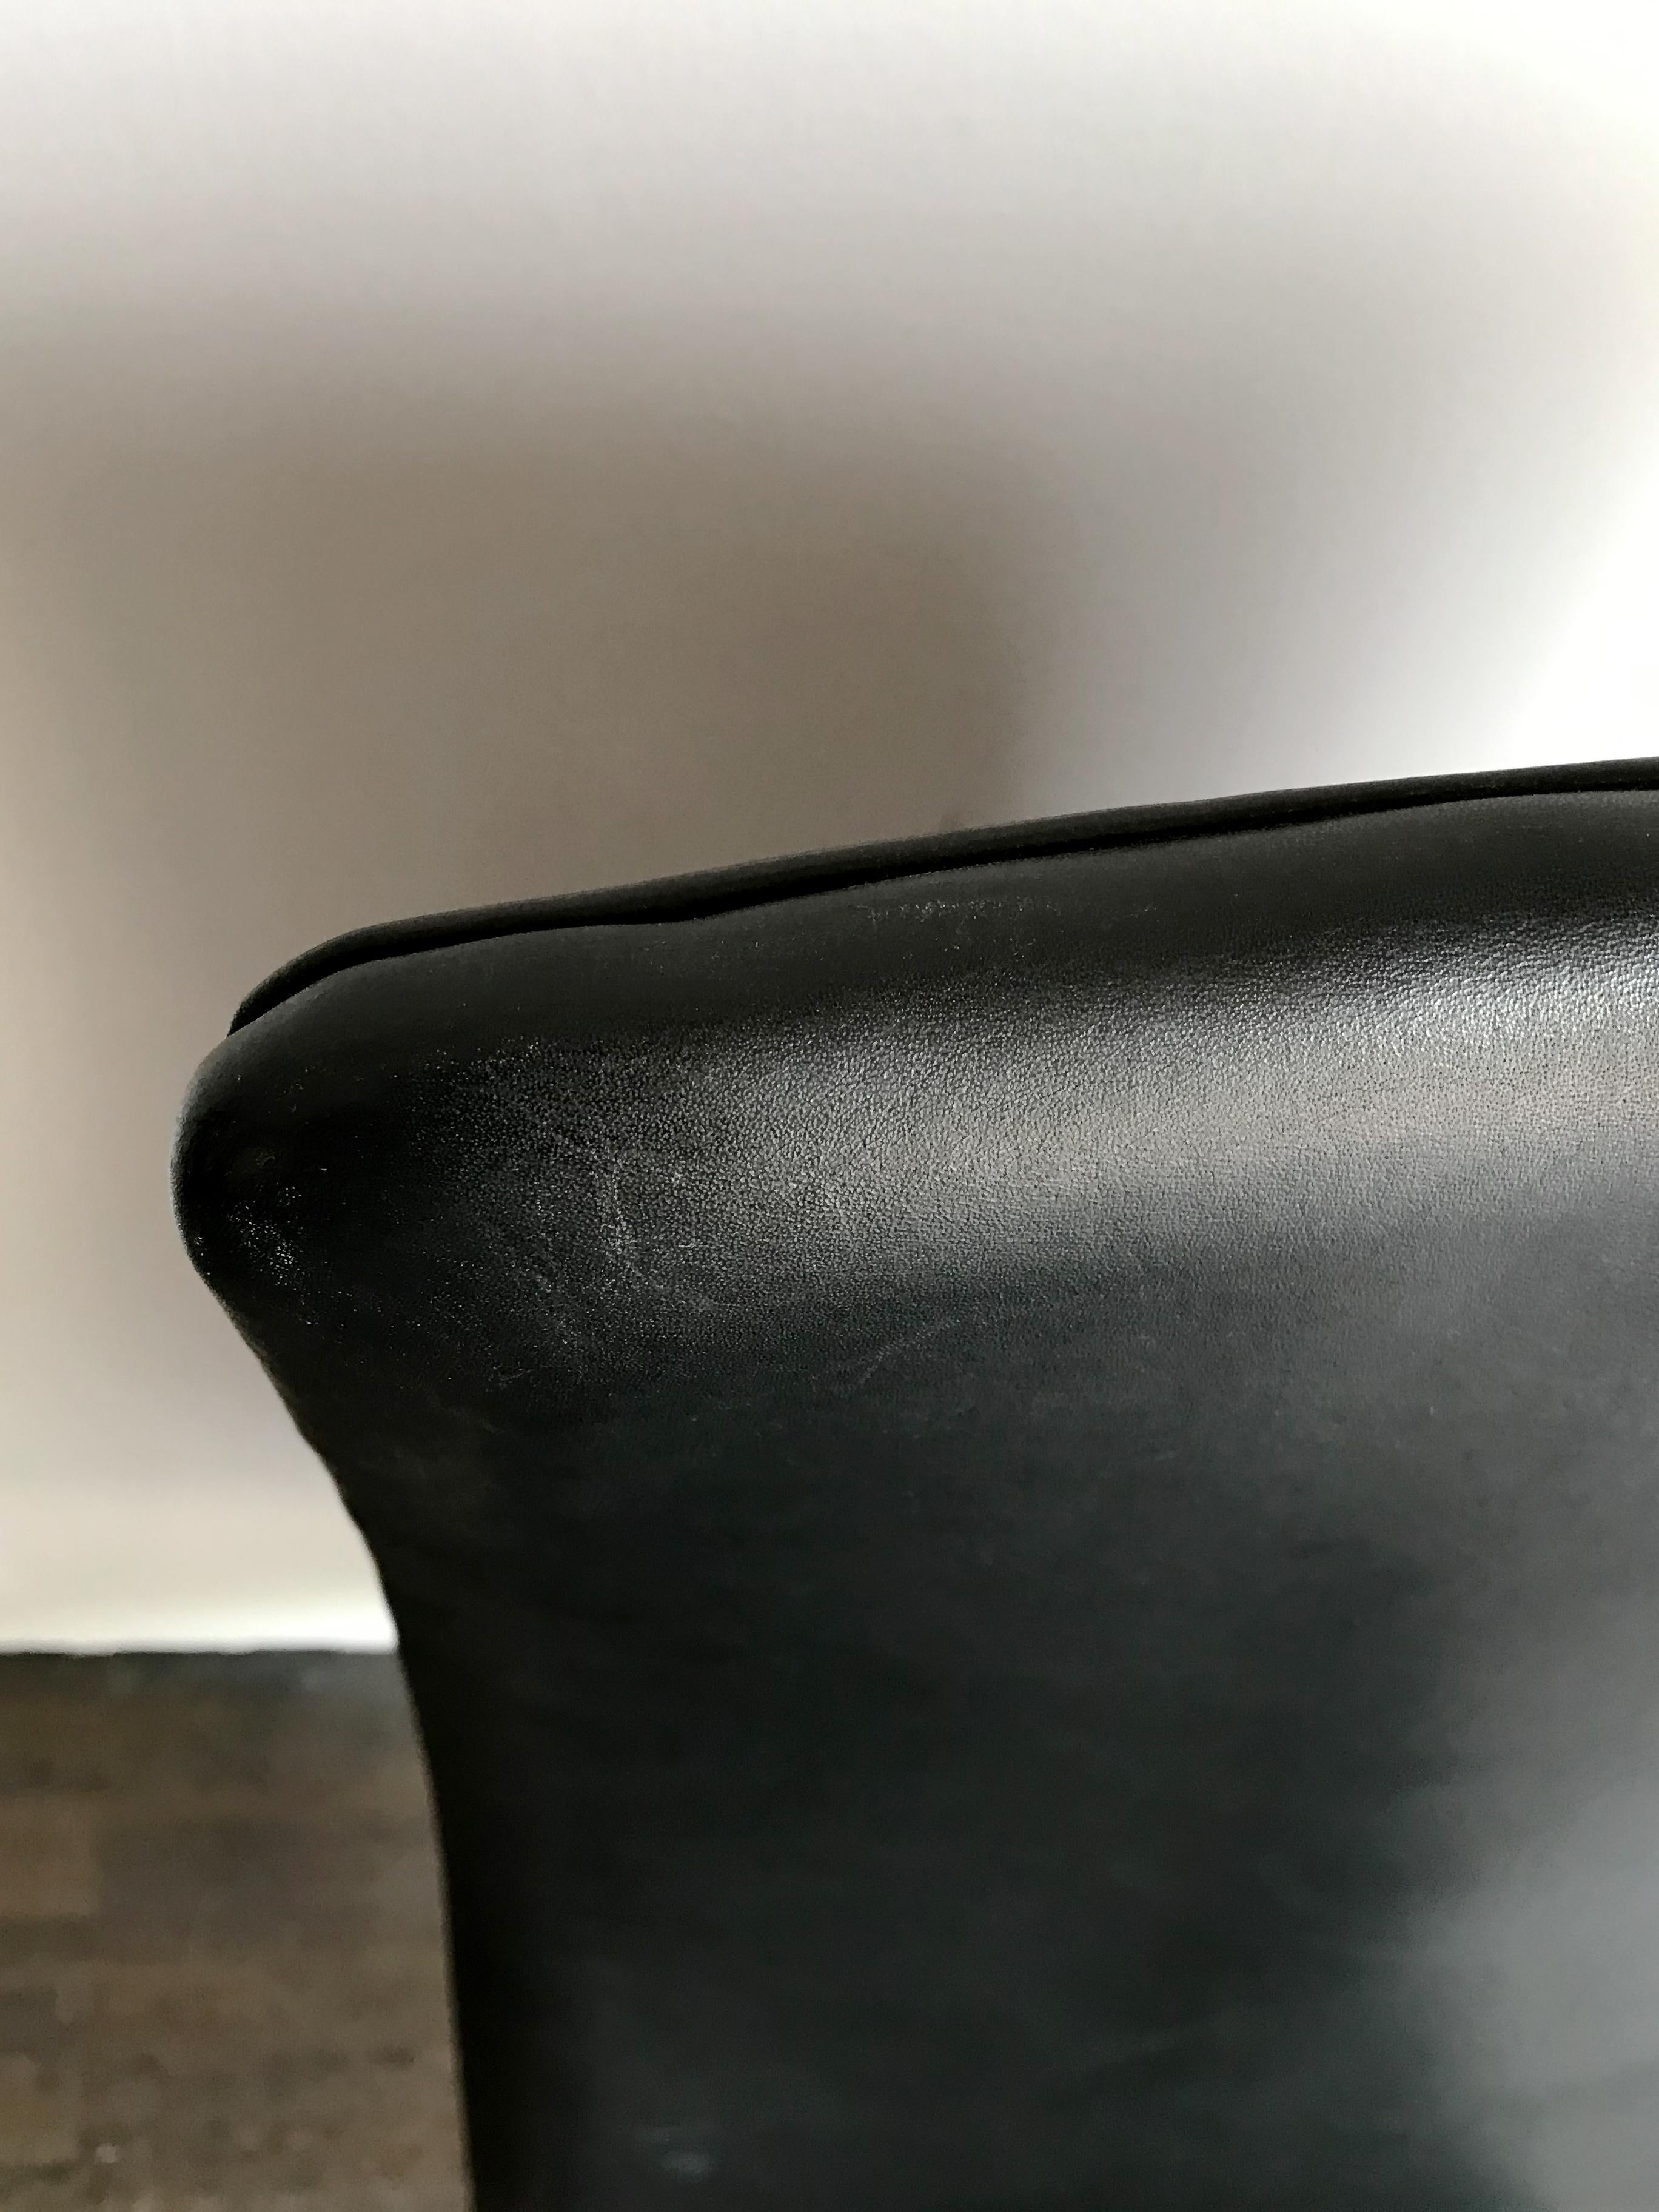 Oxford Midcentury Black Leather Chairs by Arne Jacobsen for Fritz Hansen, 1960s For Sale 7